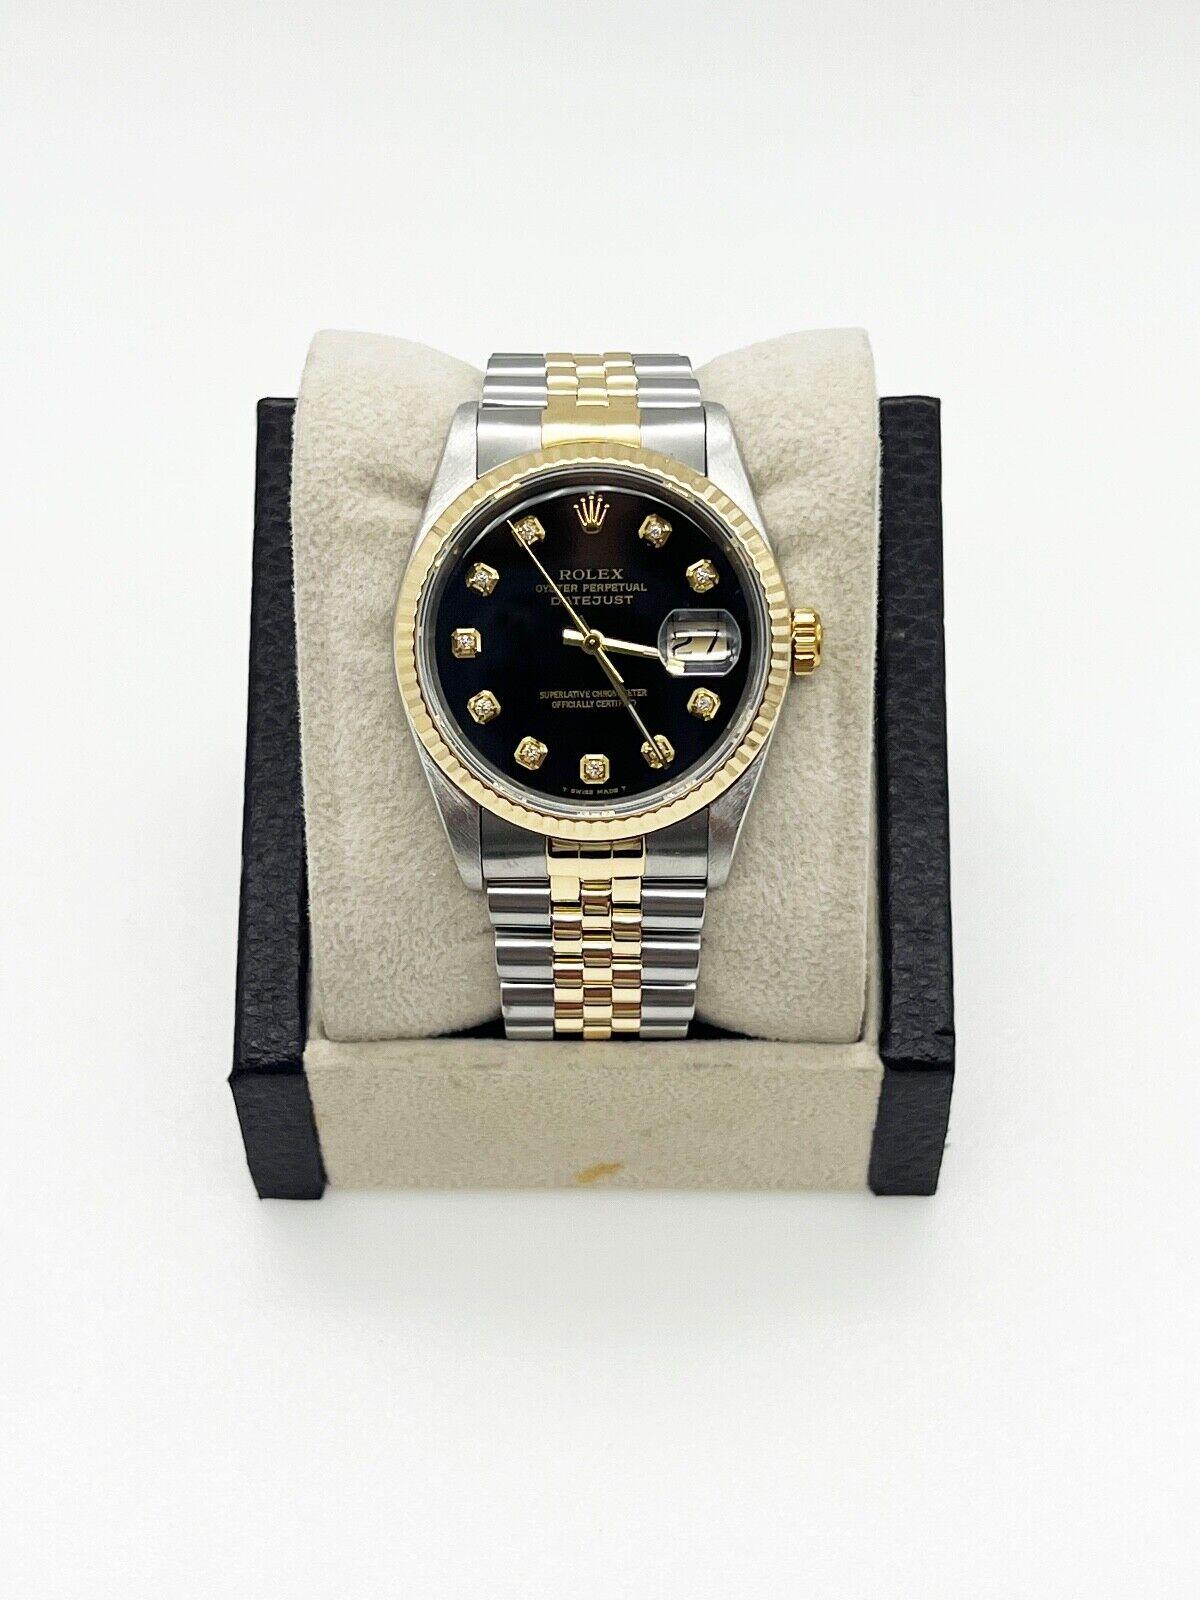 
Style Number: 16233



Serial: E396***



Year: 1990

 

Model: Datejust

 

Case Material: Stainless Steel

 

Band: 18K Yellow Gold & Stainless Steel

 

Bezel: 18K Yellow Gold

 

Dial: Custom Black Diamond Dial

 

Face: Sapphire Crystal

